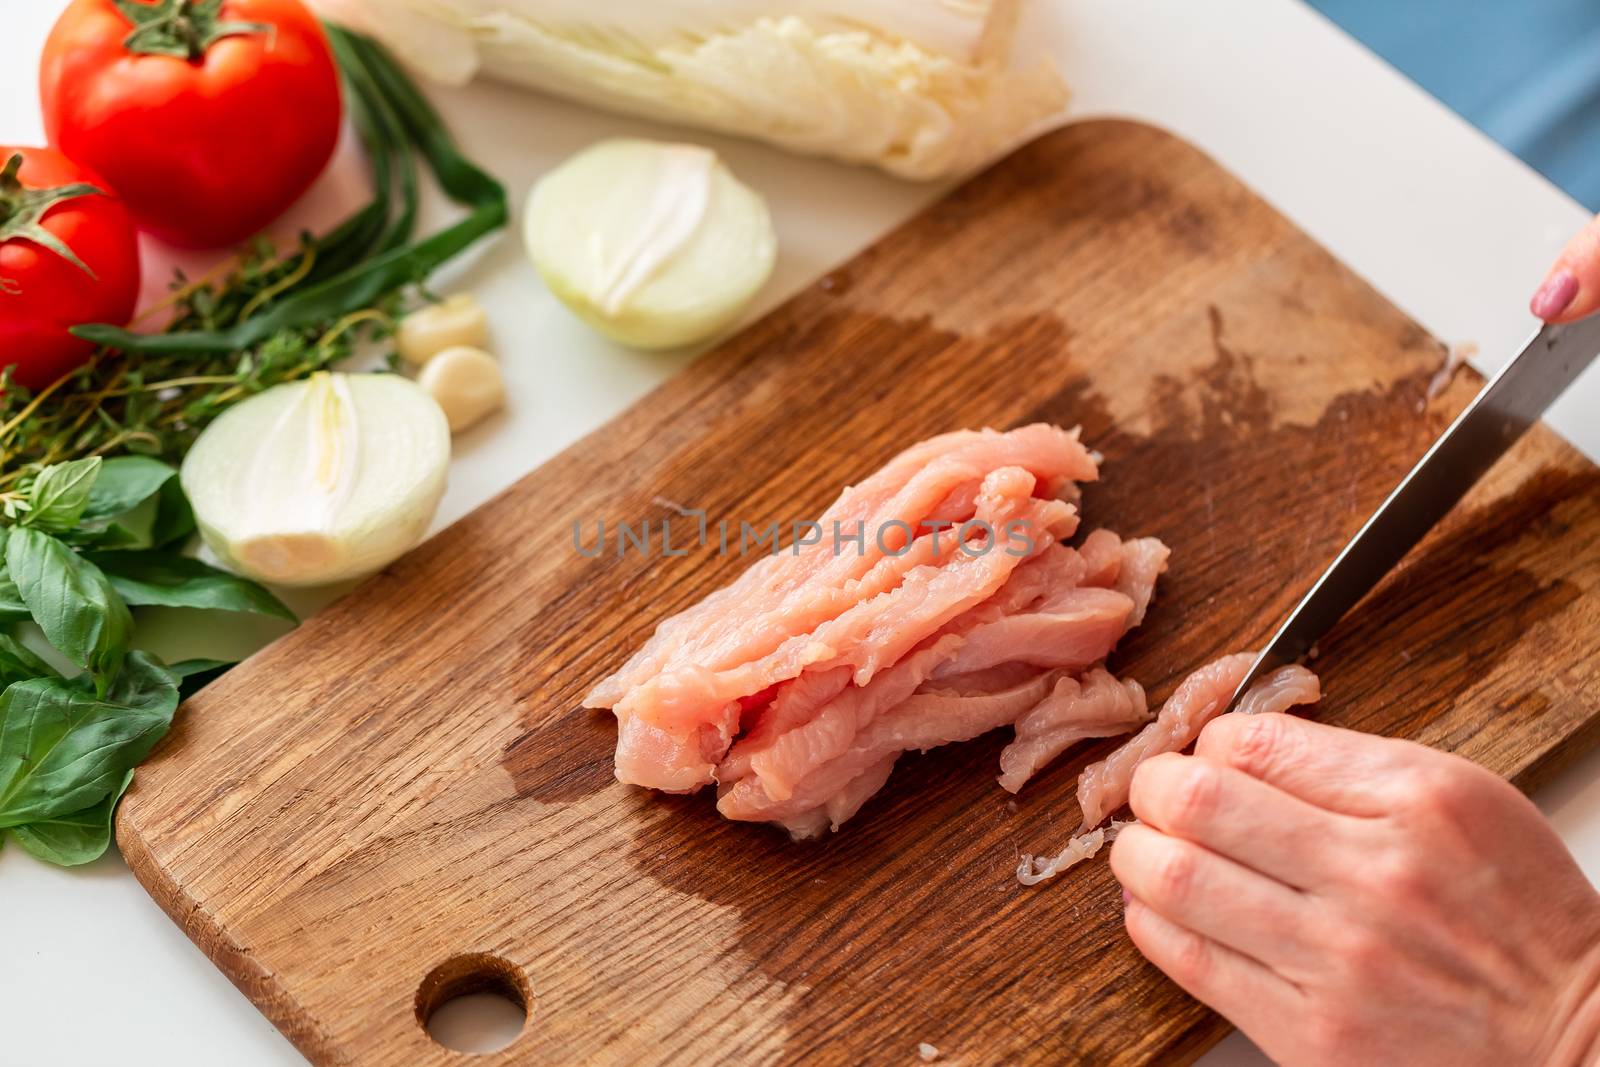 Cooking chicken tenders at home. Cutting chicken fillet on the wooden board for the dish. How to cook cabbage rolls instructions.